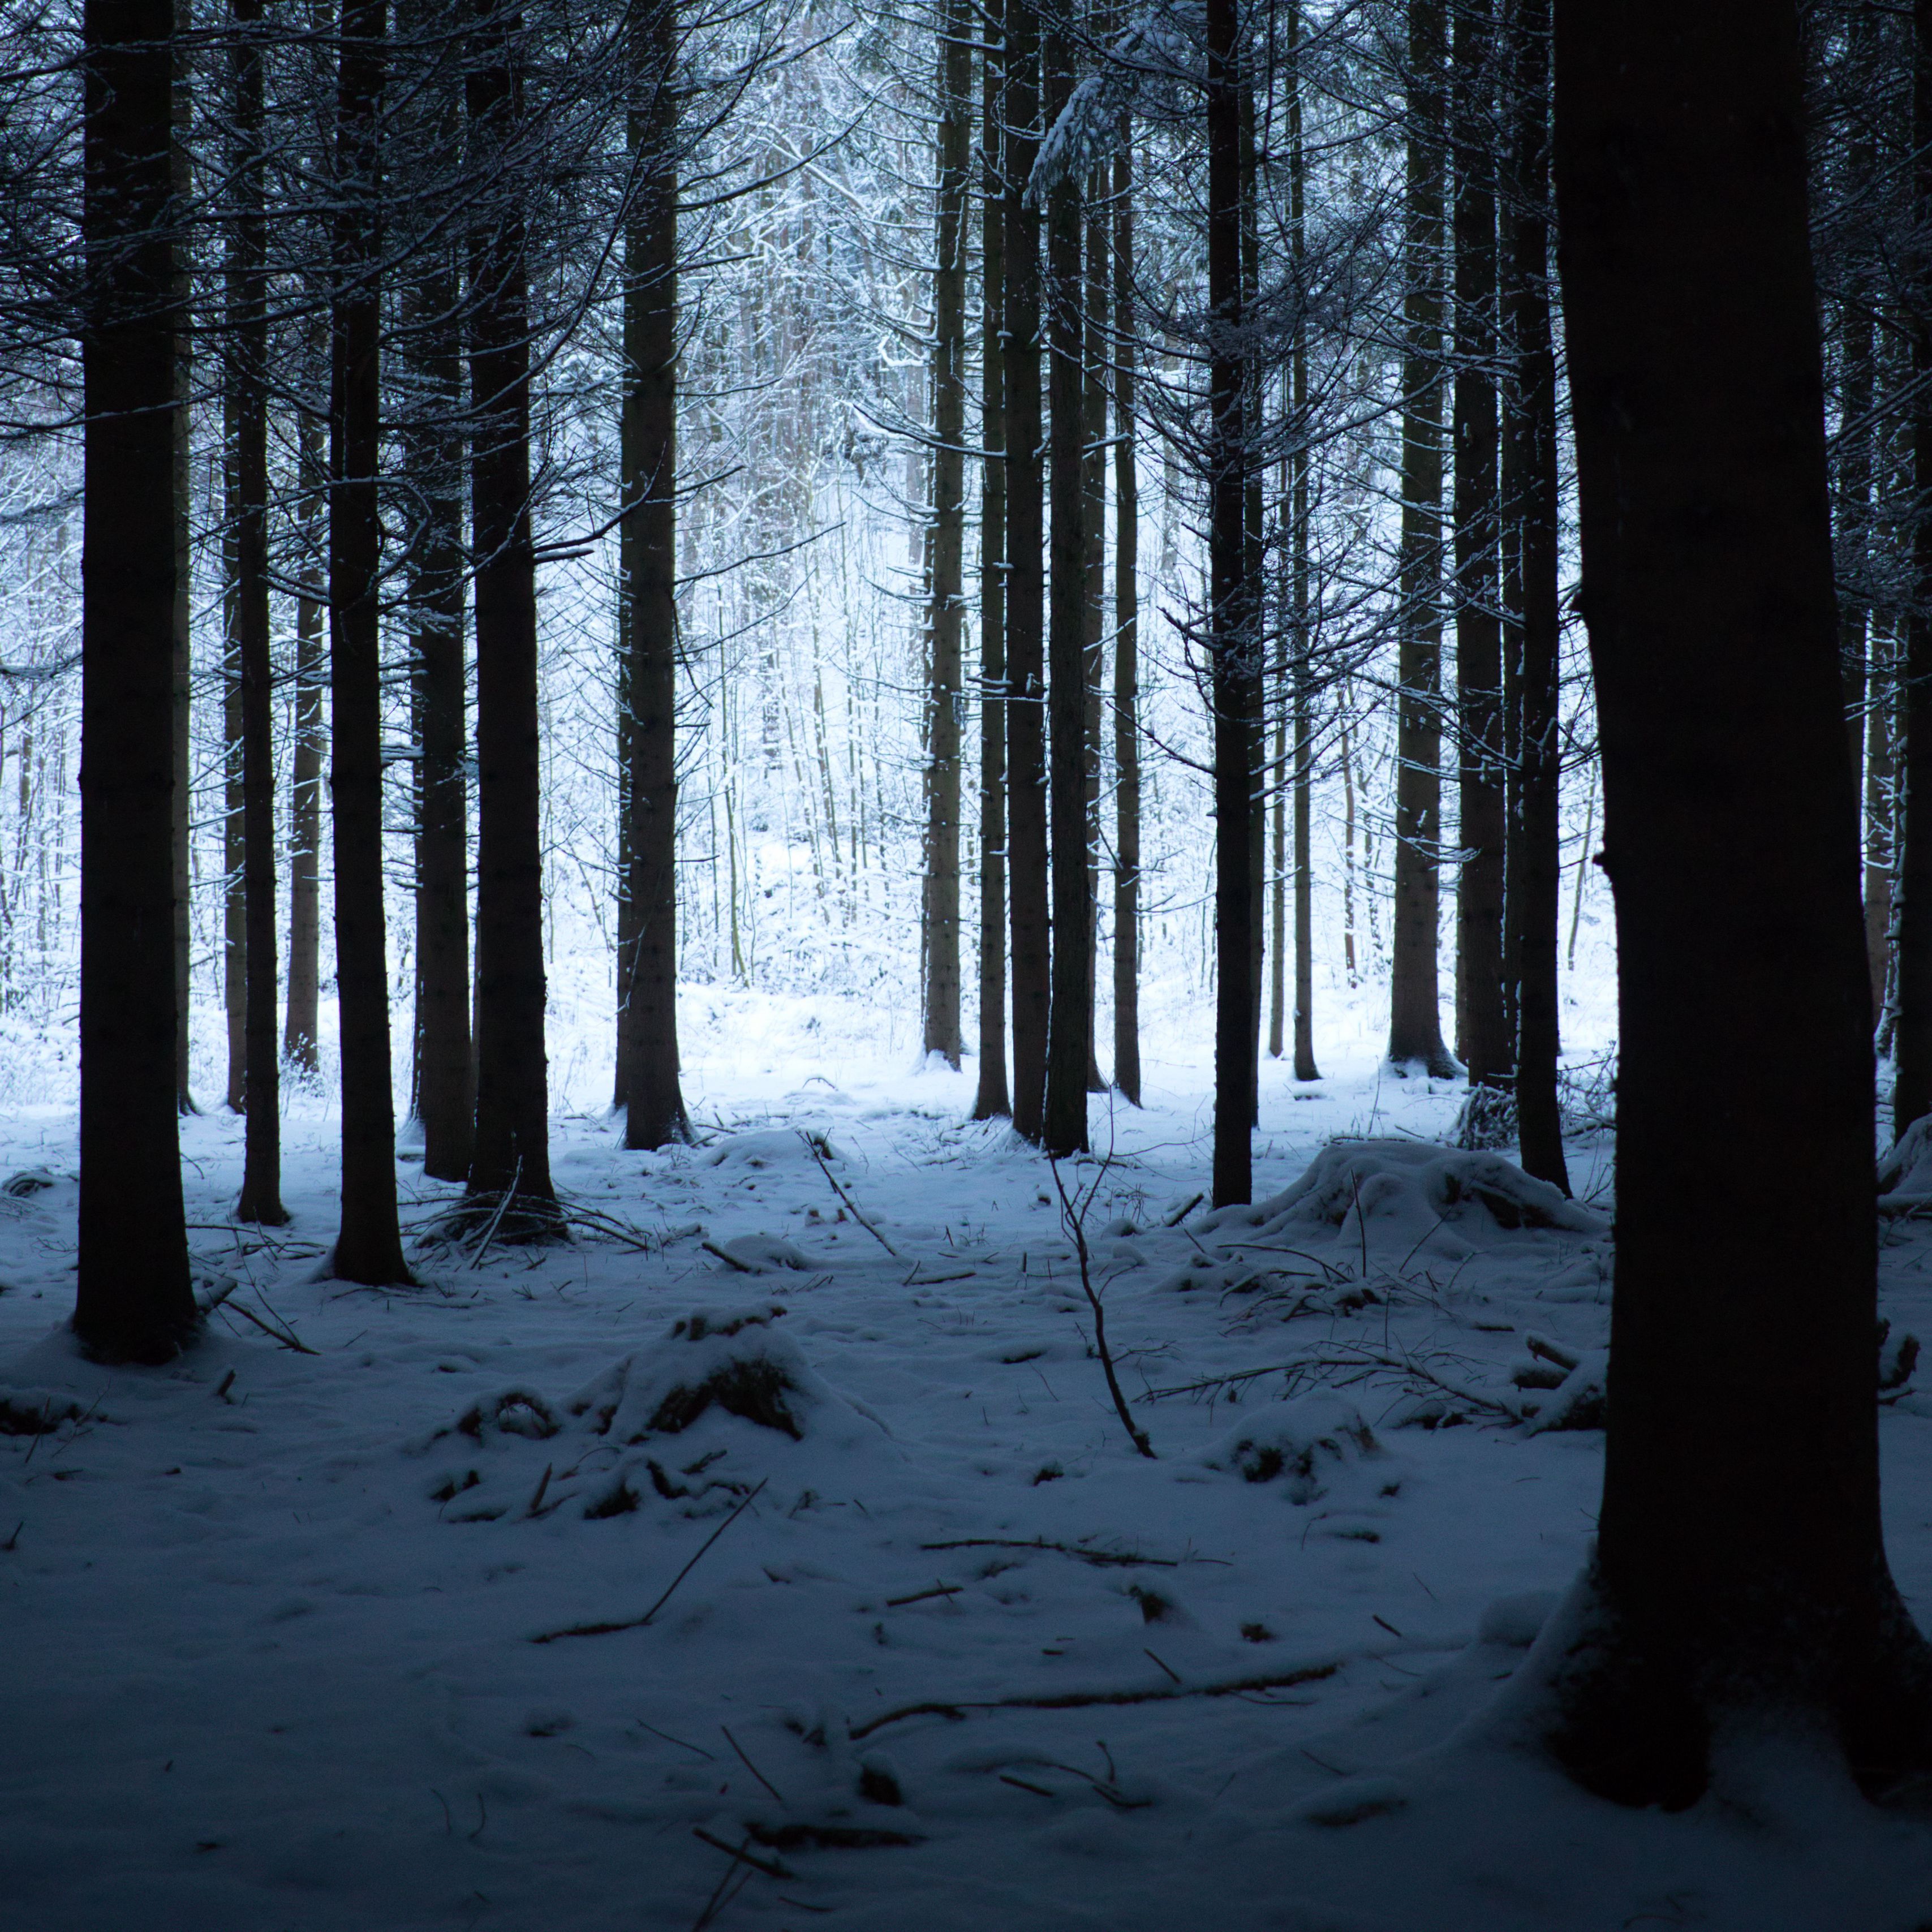 Download wallpaper 3415x3415 forest, winter, snow, trees, snowy, hike ipad pro 12.9 retina for parallax HD background